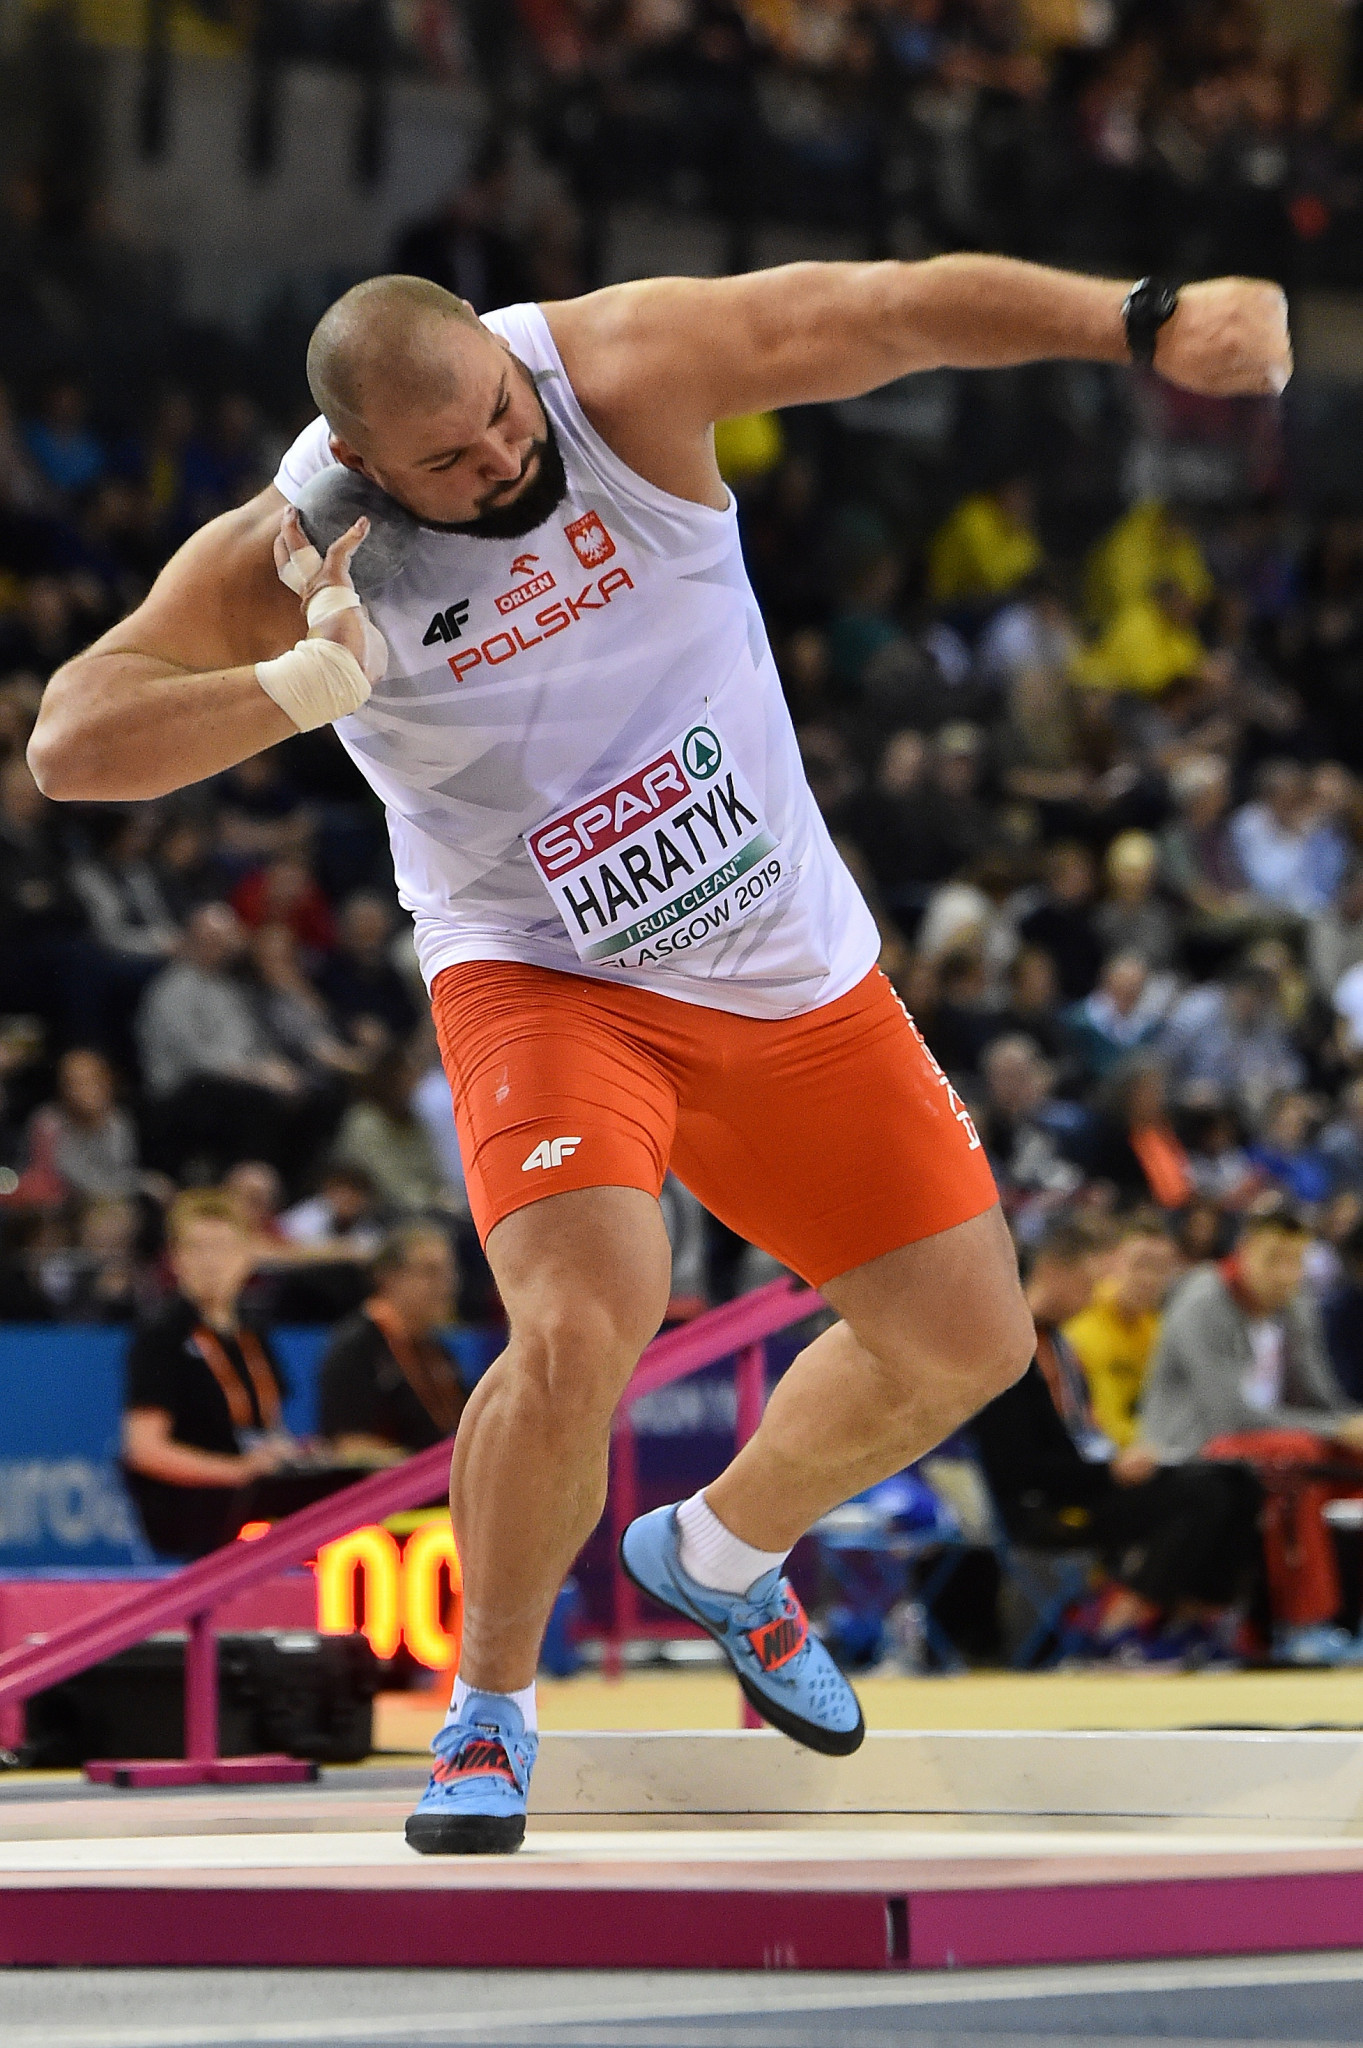 Poland's Michal Haratyk won the first gold of the Glasgow 2019 European Athletics Indoor Championships with a shot put of 21.65m ©Getty Images 